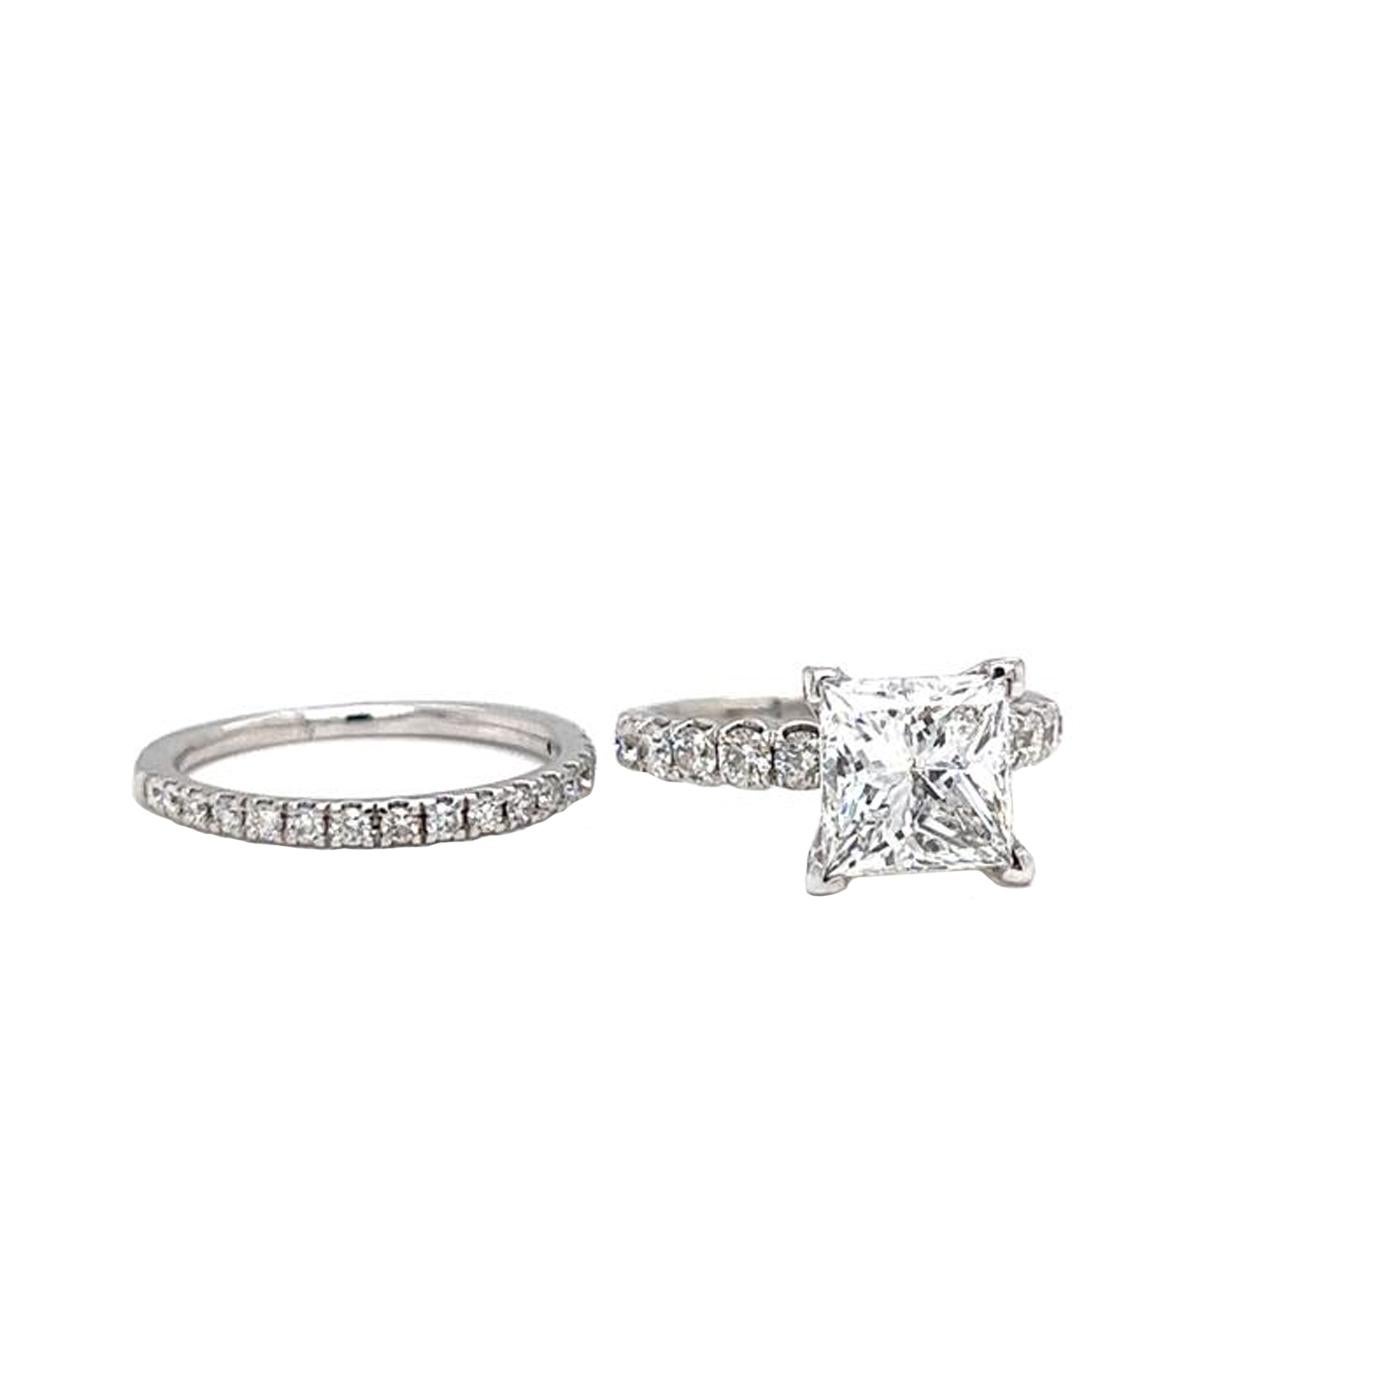 This stunning GIA Graded 3395781882 princess diamond wedding ring is sure to wow. With a total carat weight of 3.00ctw, this ring features princess-cut diamonds that create a captivating and eye-catching design. The ring gives a luxurious and